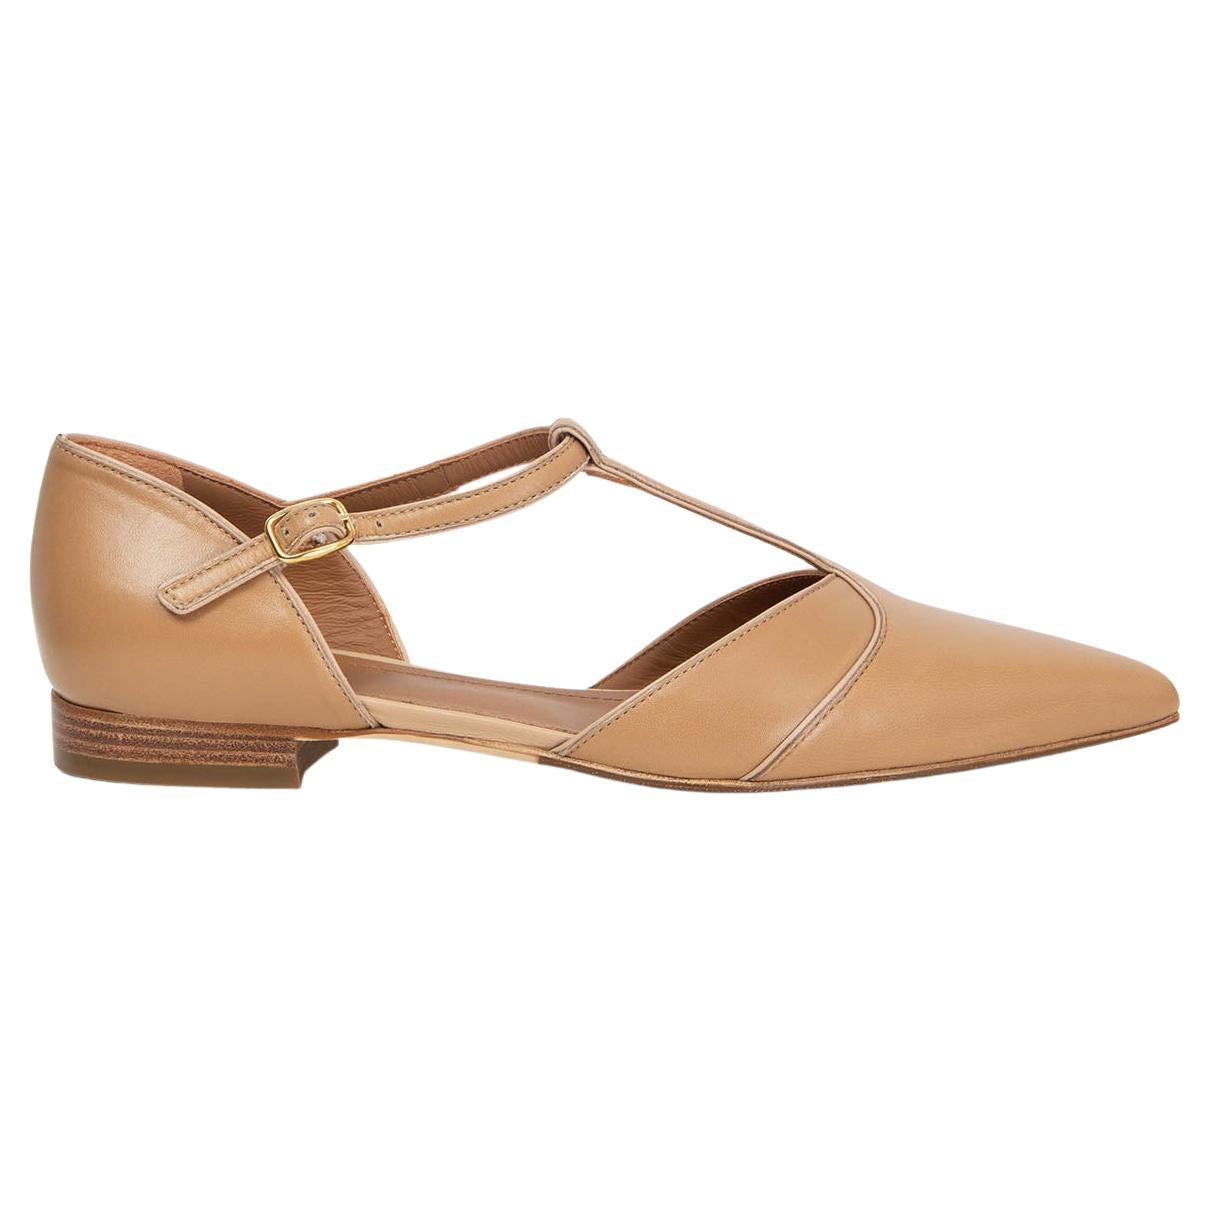 MALONE SOULIERS beige leather IMMY Ballet Flats Shoes 38.5 For Sale